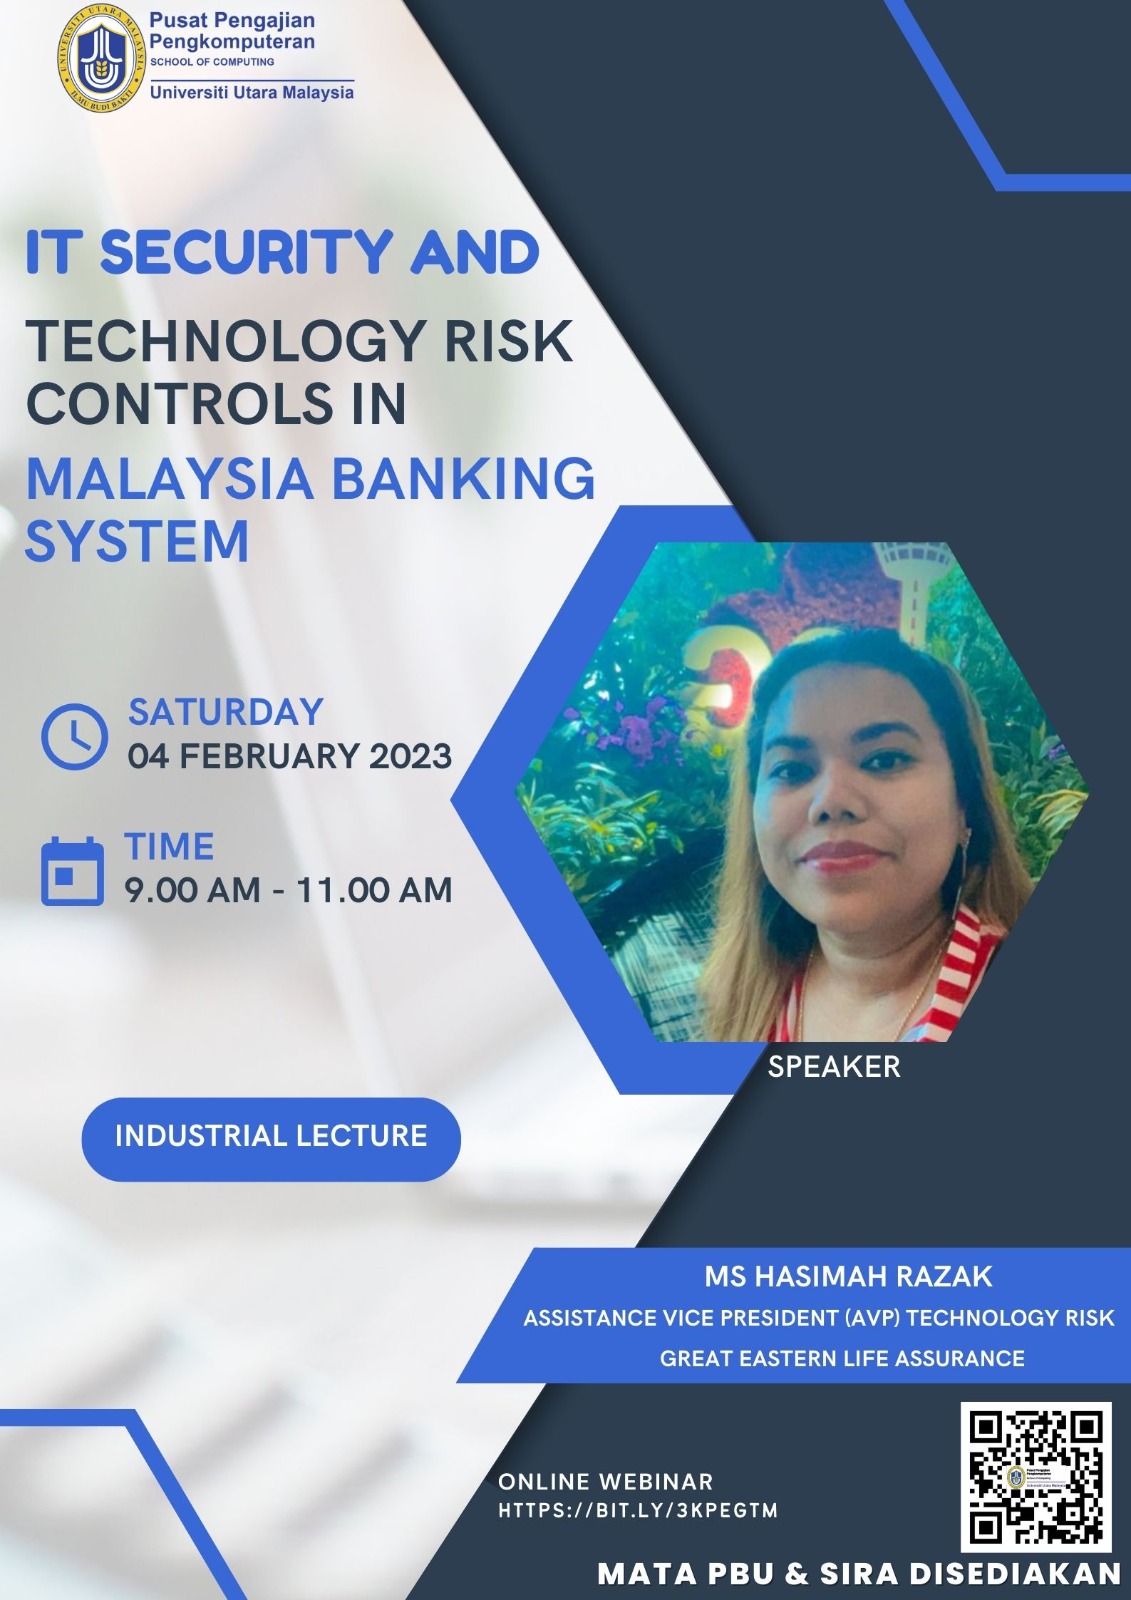 3 IT Security and Risk Controls in Malaysia Banking System MS Hasimah Razak